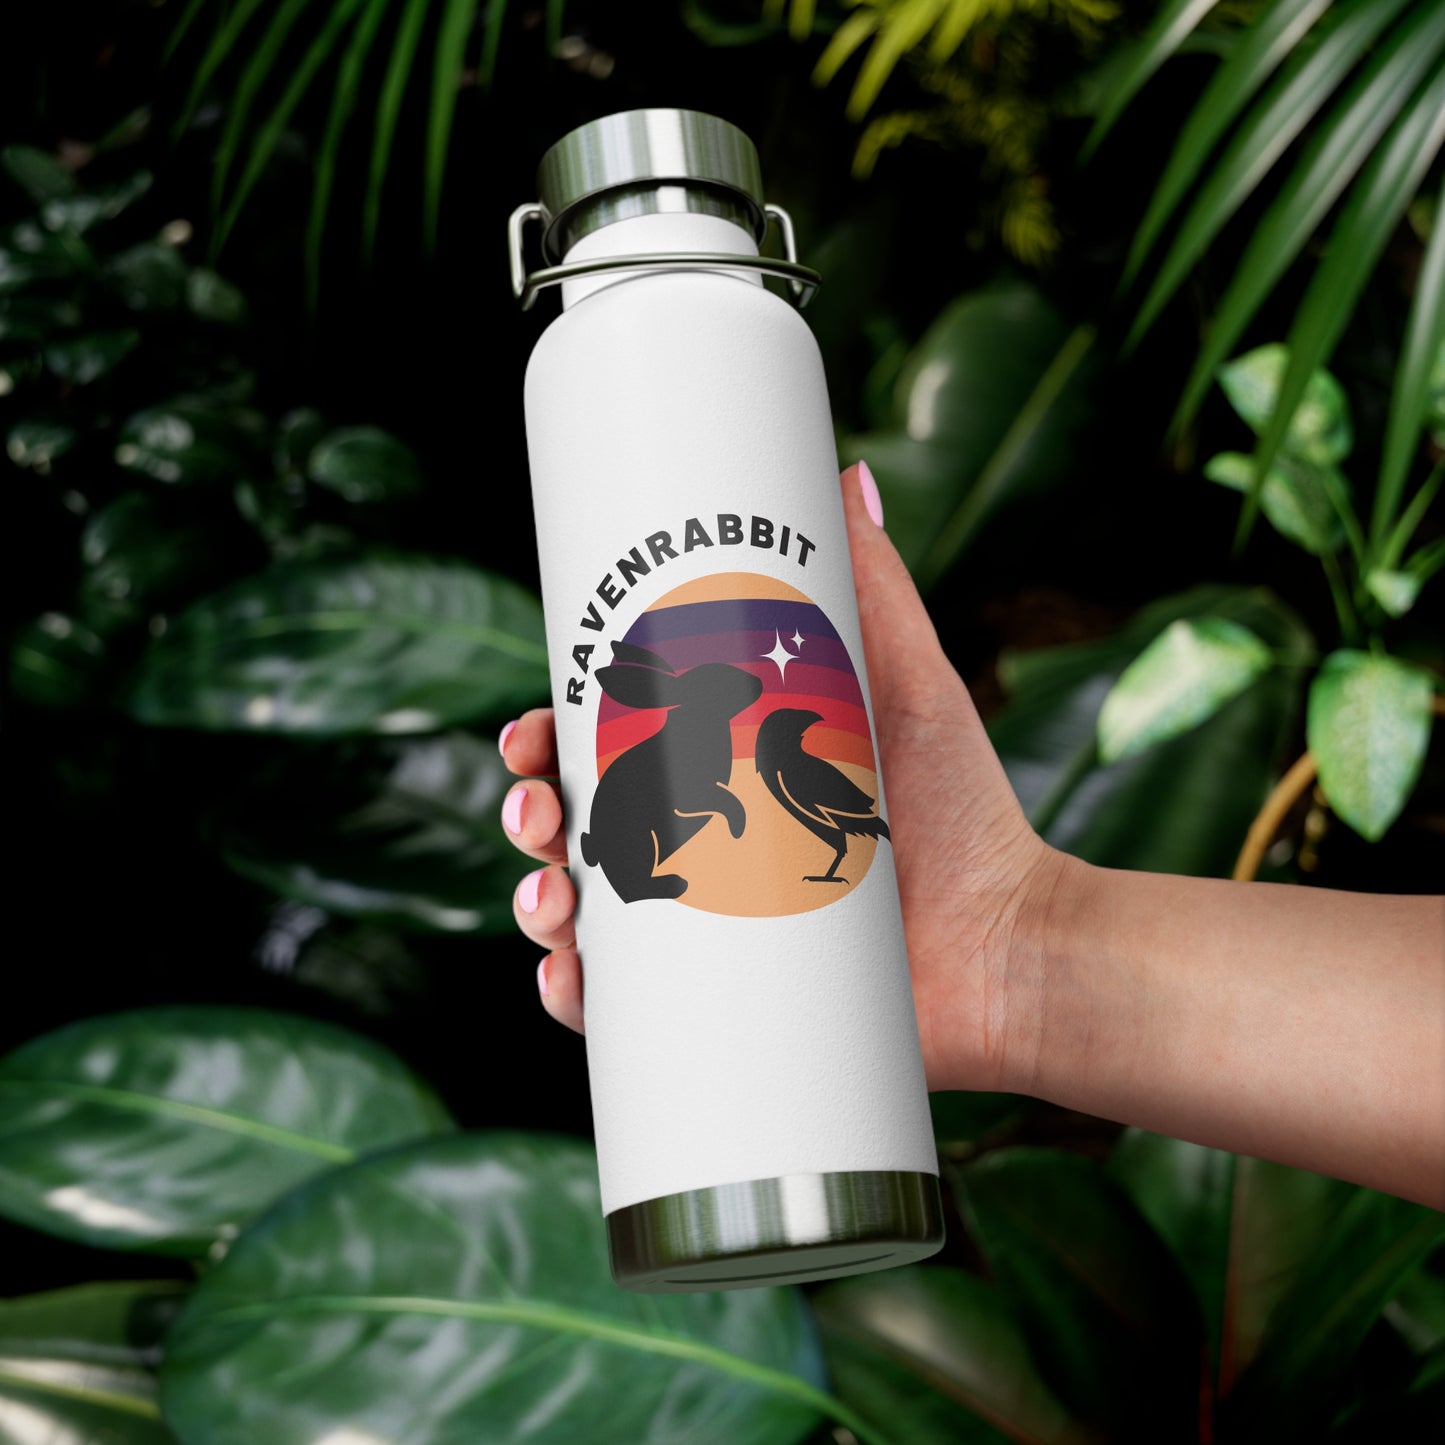 🐰🐦‍⬛  RavenRabbit Copper Vacuum Insulated Bottle, 22oz, Keep Hydrated in Style! 🌿🌌